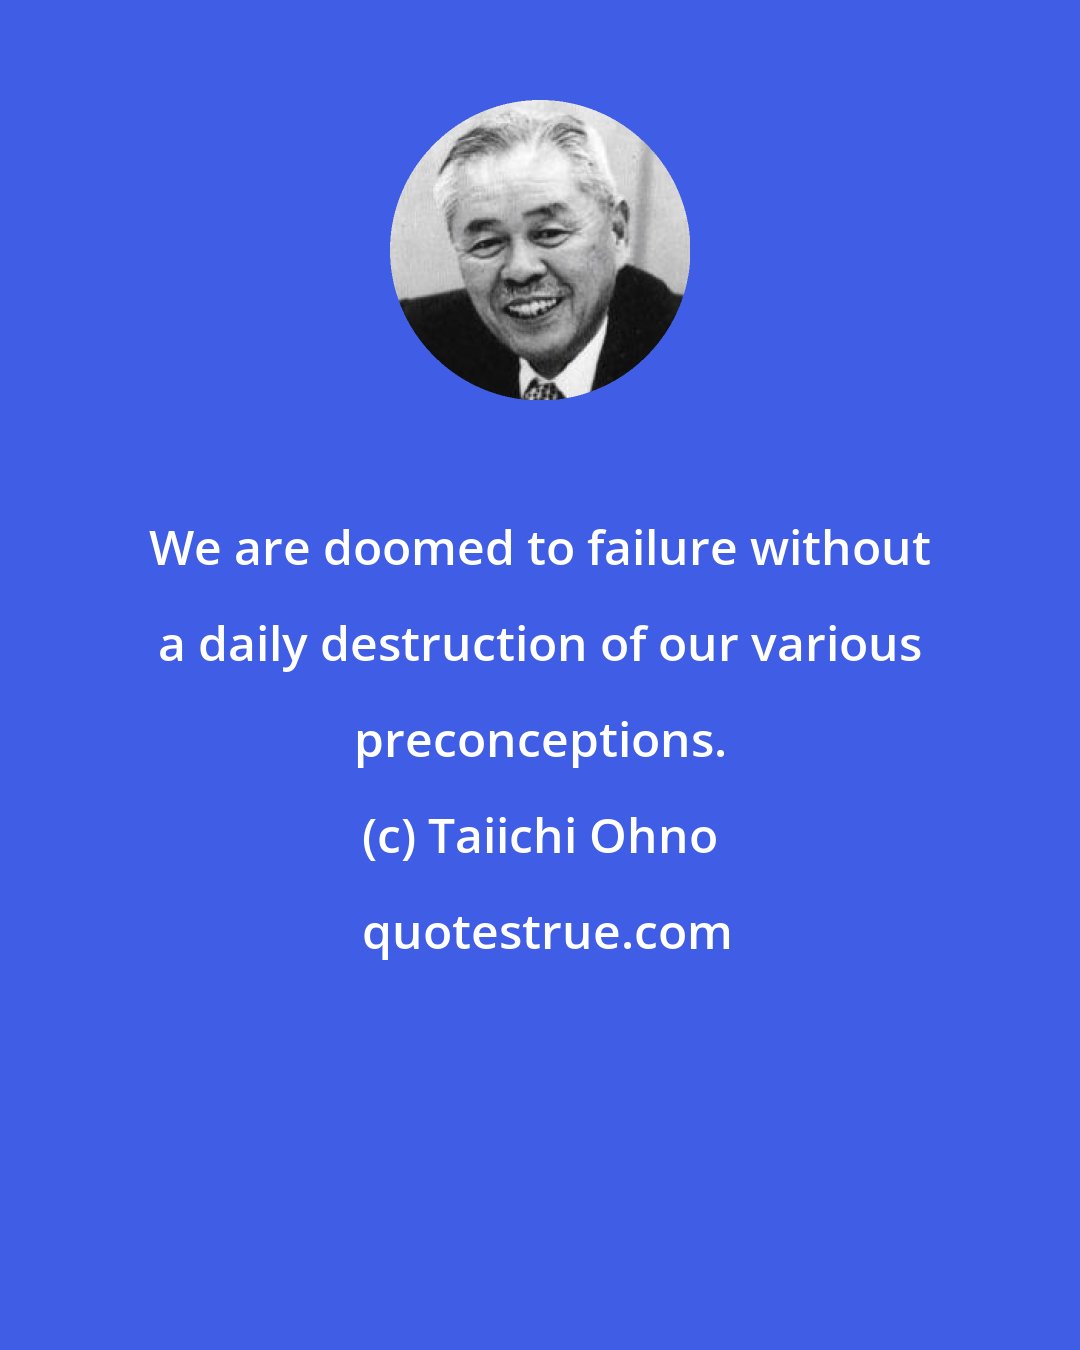 Taiichi Ohno: We are doomed to failure without a daily destruction of our various preconceptions.